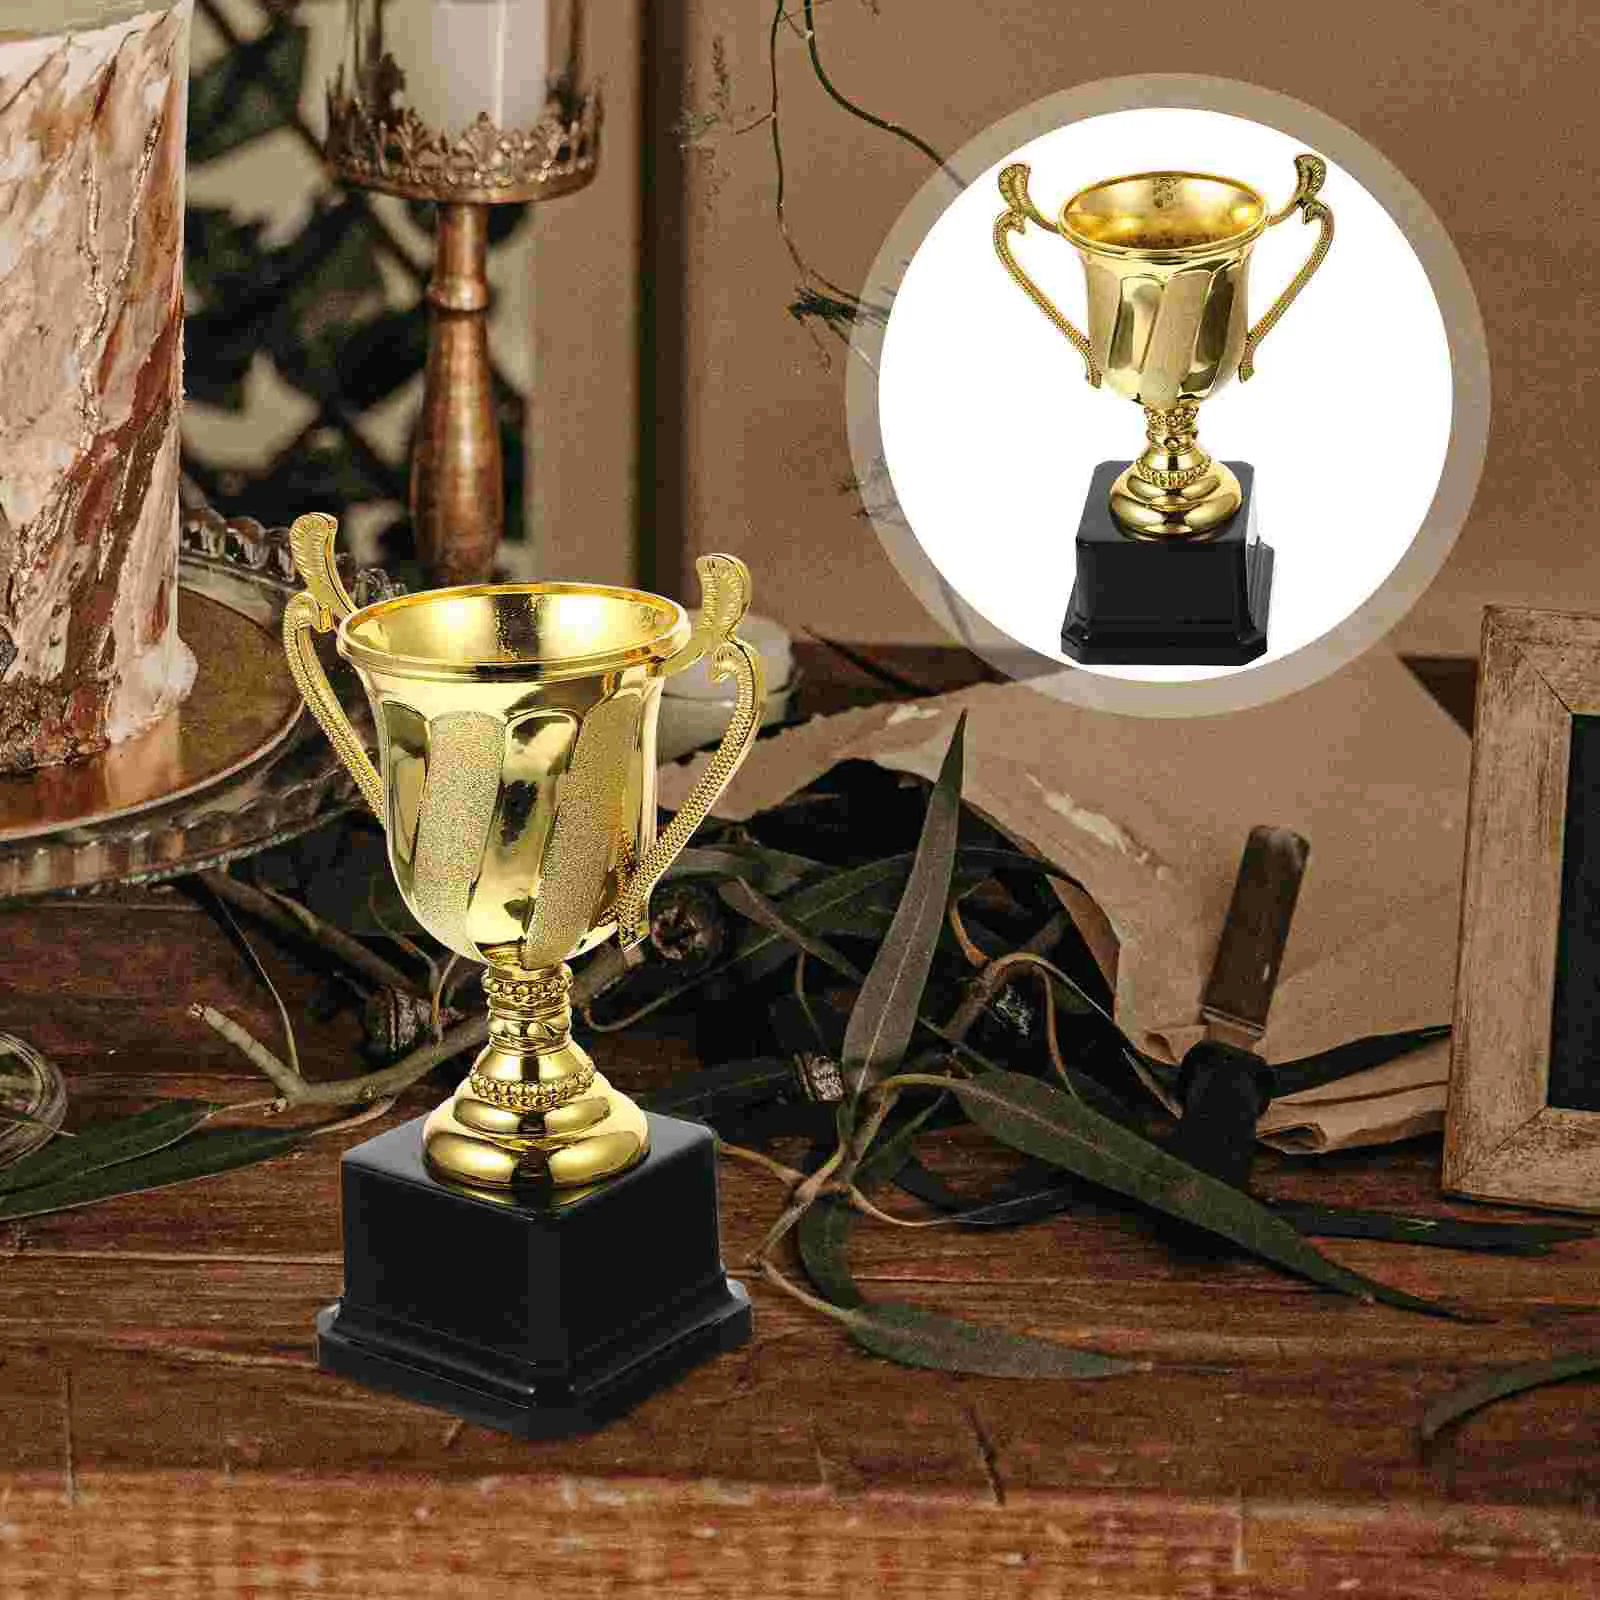 

Children's Competition Trophy Kid Plastic Gold Trophies Soccer Chic Award Prizes Kids Compact Sports Football Prop